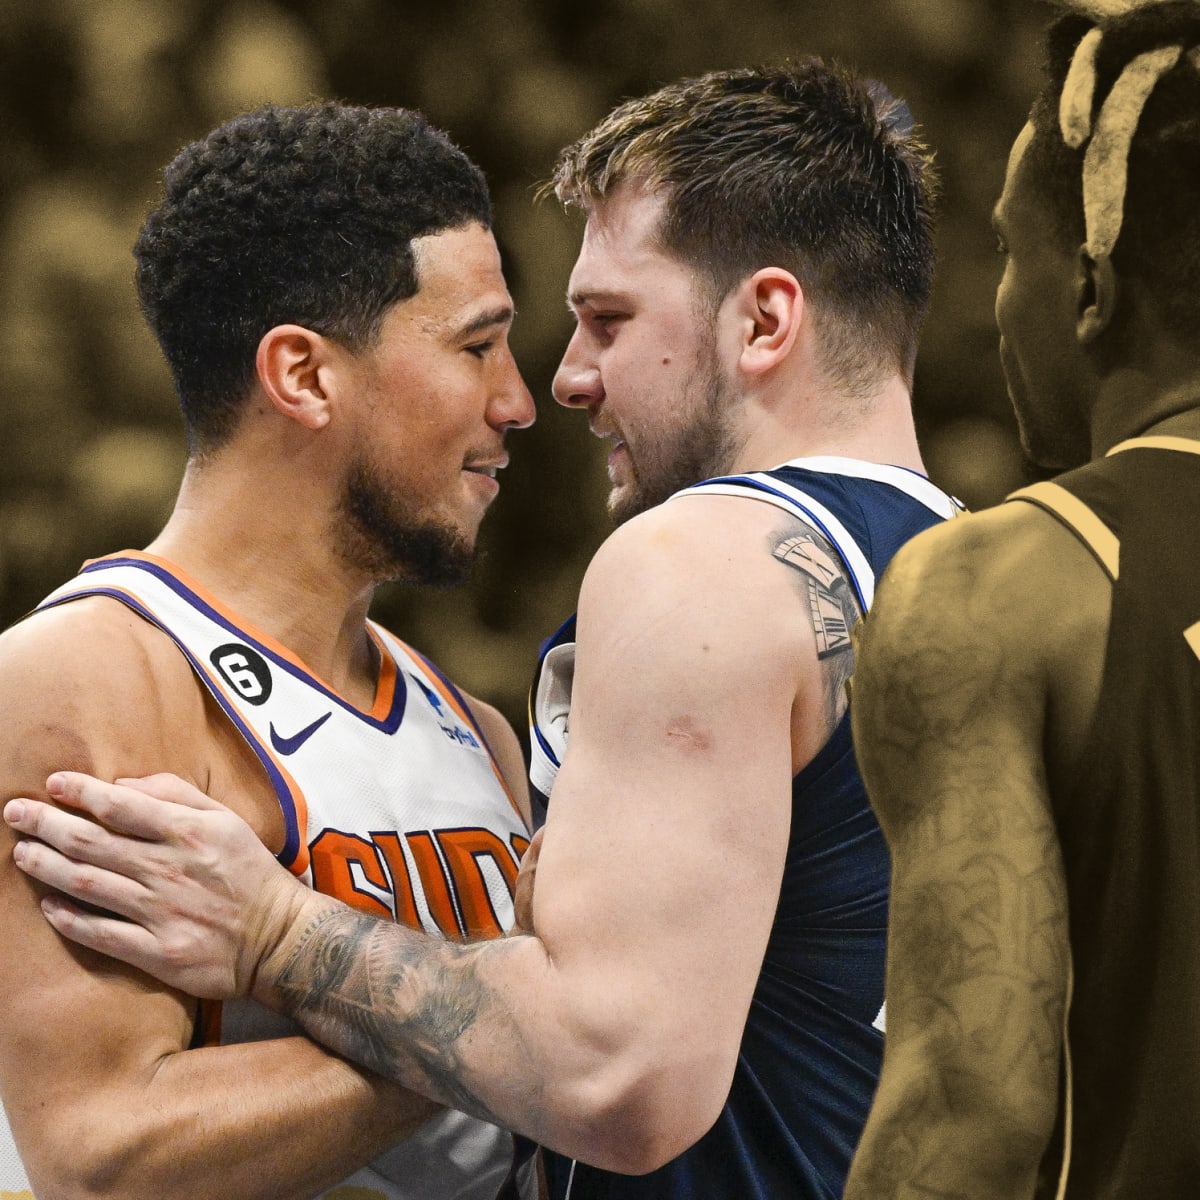 Luka Doncic, Devin Booker get into heated exchange at end of another  Mavericks-Suns battle